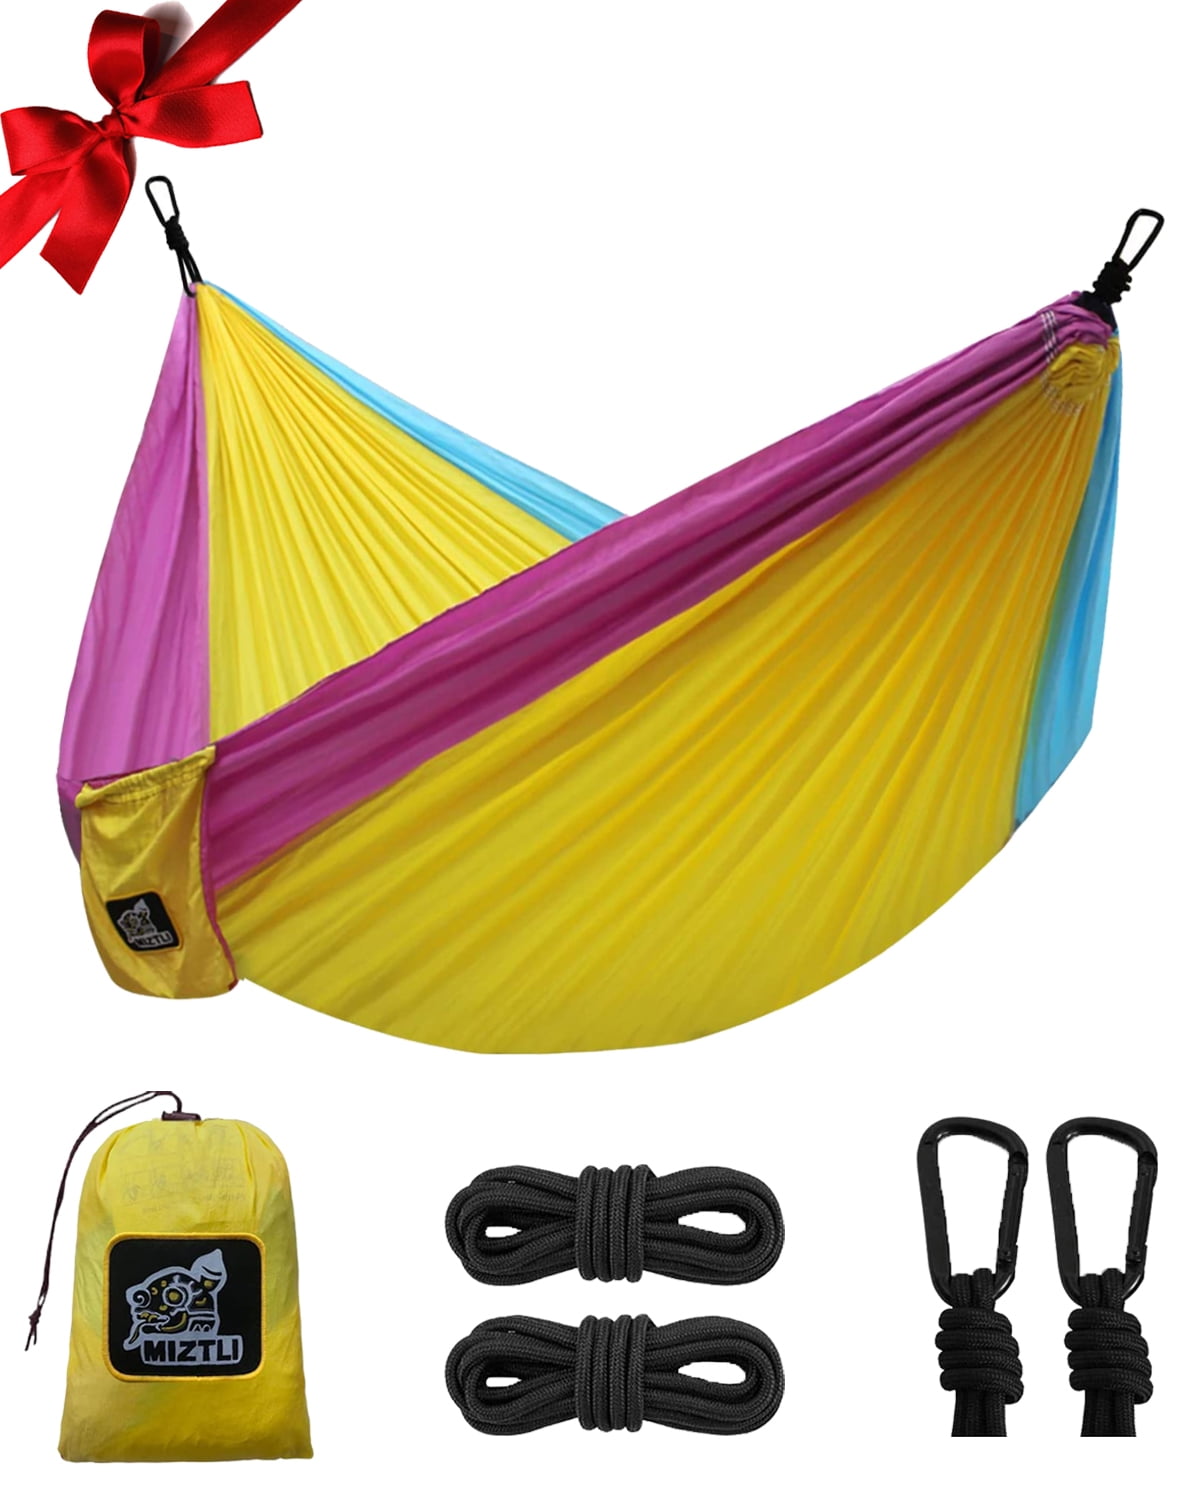 Camping Hammock In a Bag Free Delivery Festivals Indoor and Outdoor Use 